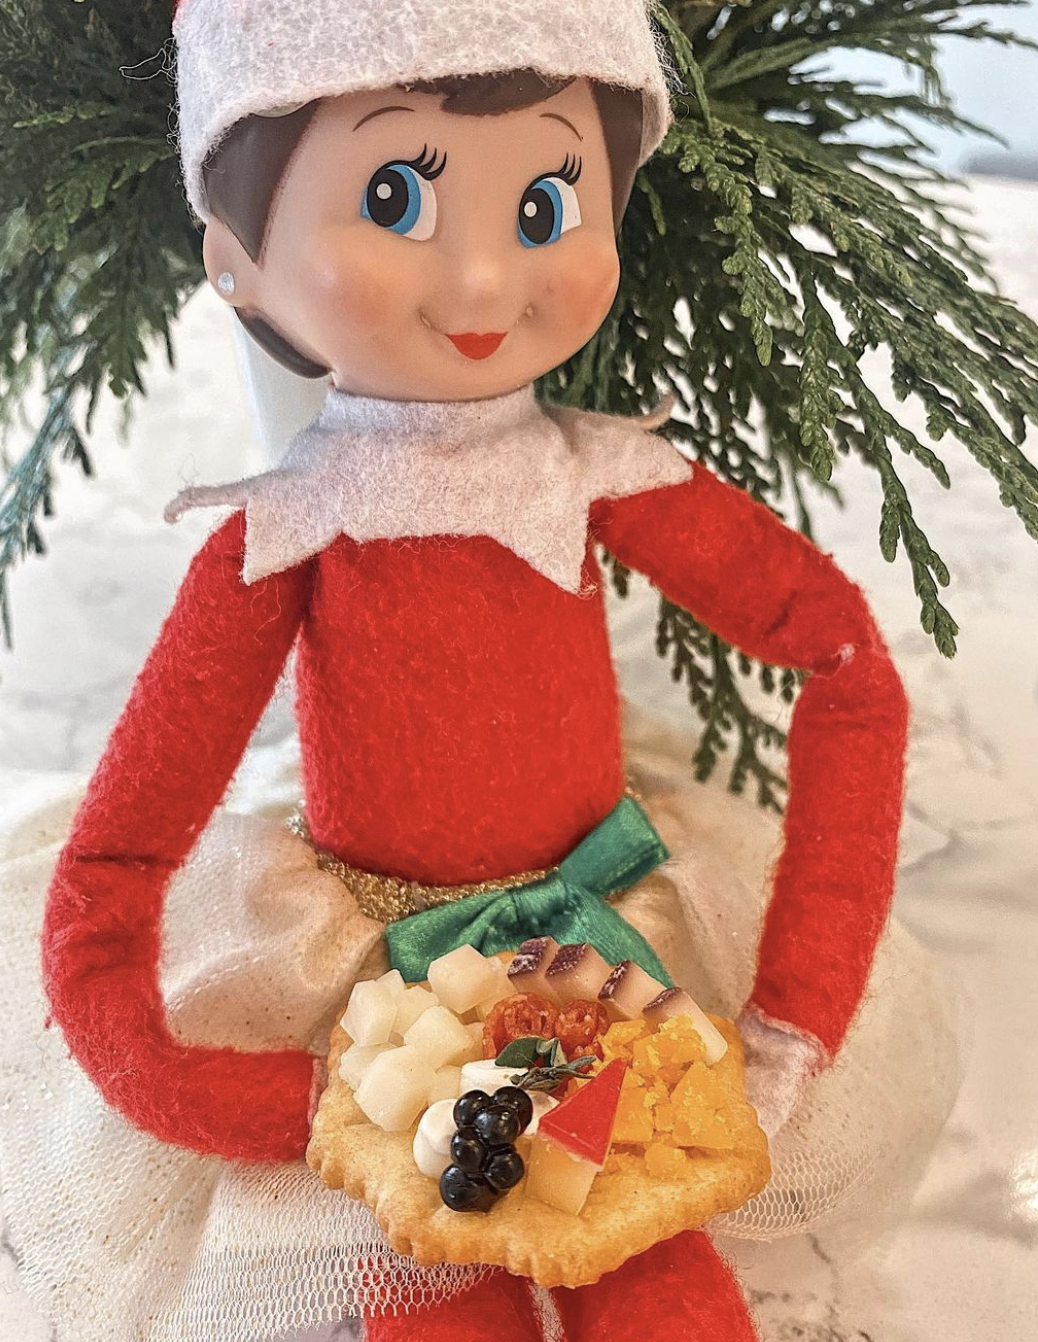 Elf oh the Shelf gets his own charcuterie board!